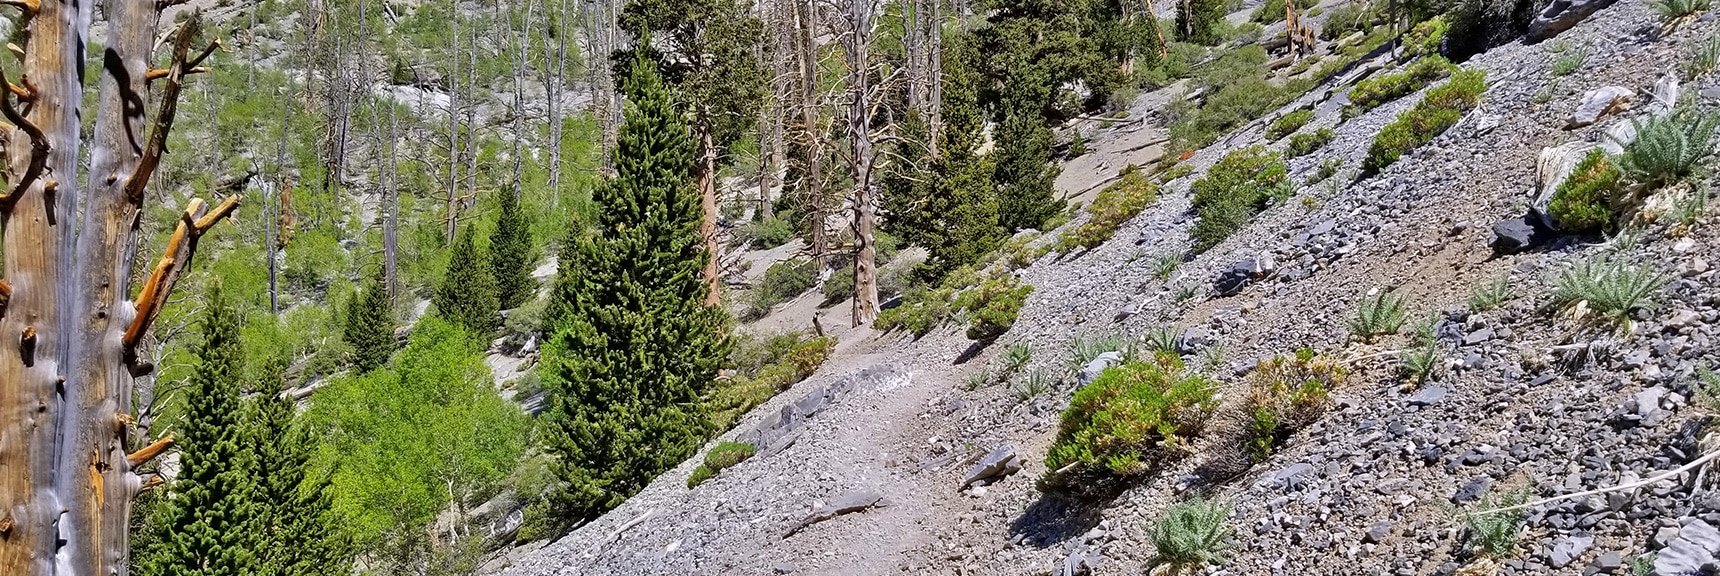 North Loop Trail at the Mummy Tree, Base of the "Horrifying Half-Mile" Ascent Toward Mummy Mountain | Mummy Mountain NW Cliffs | Mt Charleston Wilderness | Spring Mountains, Nevada